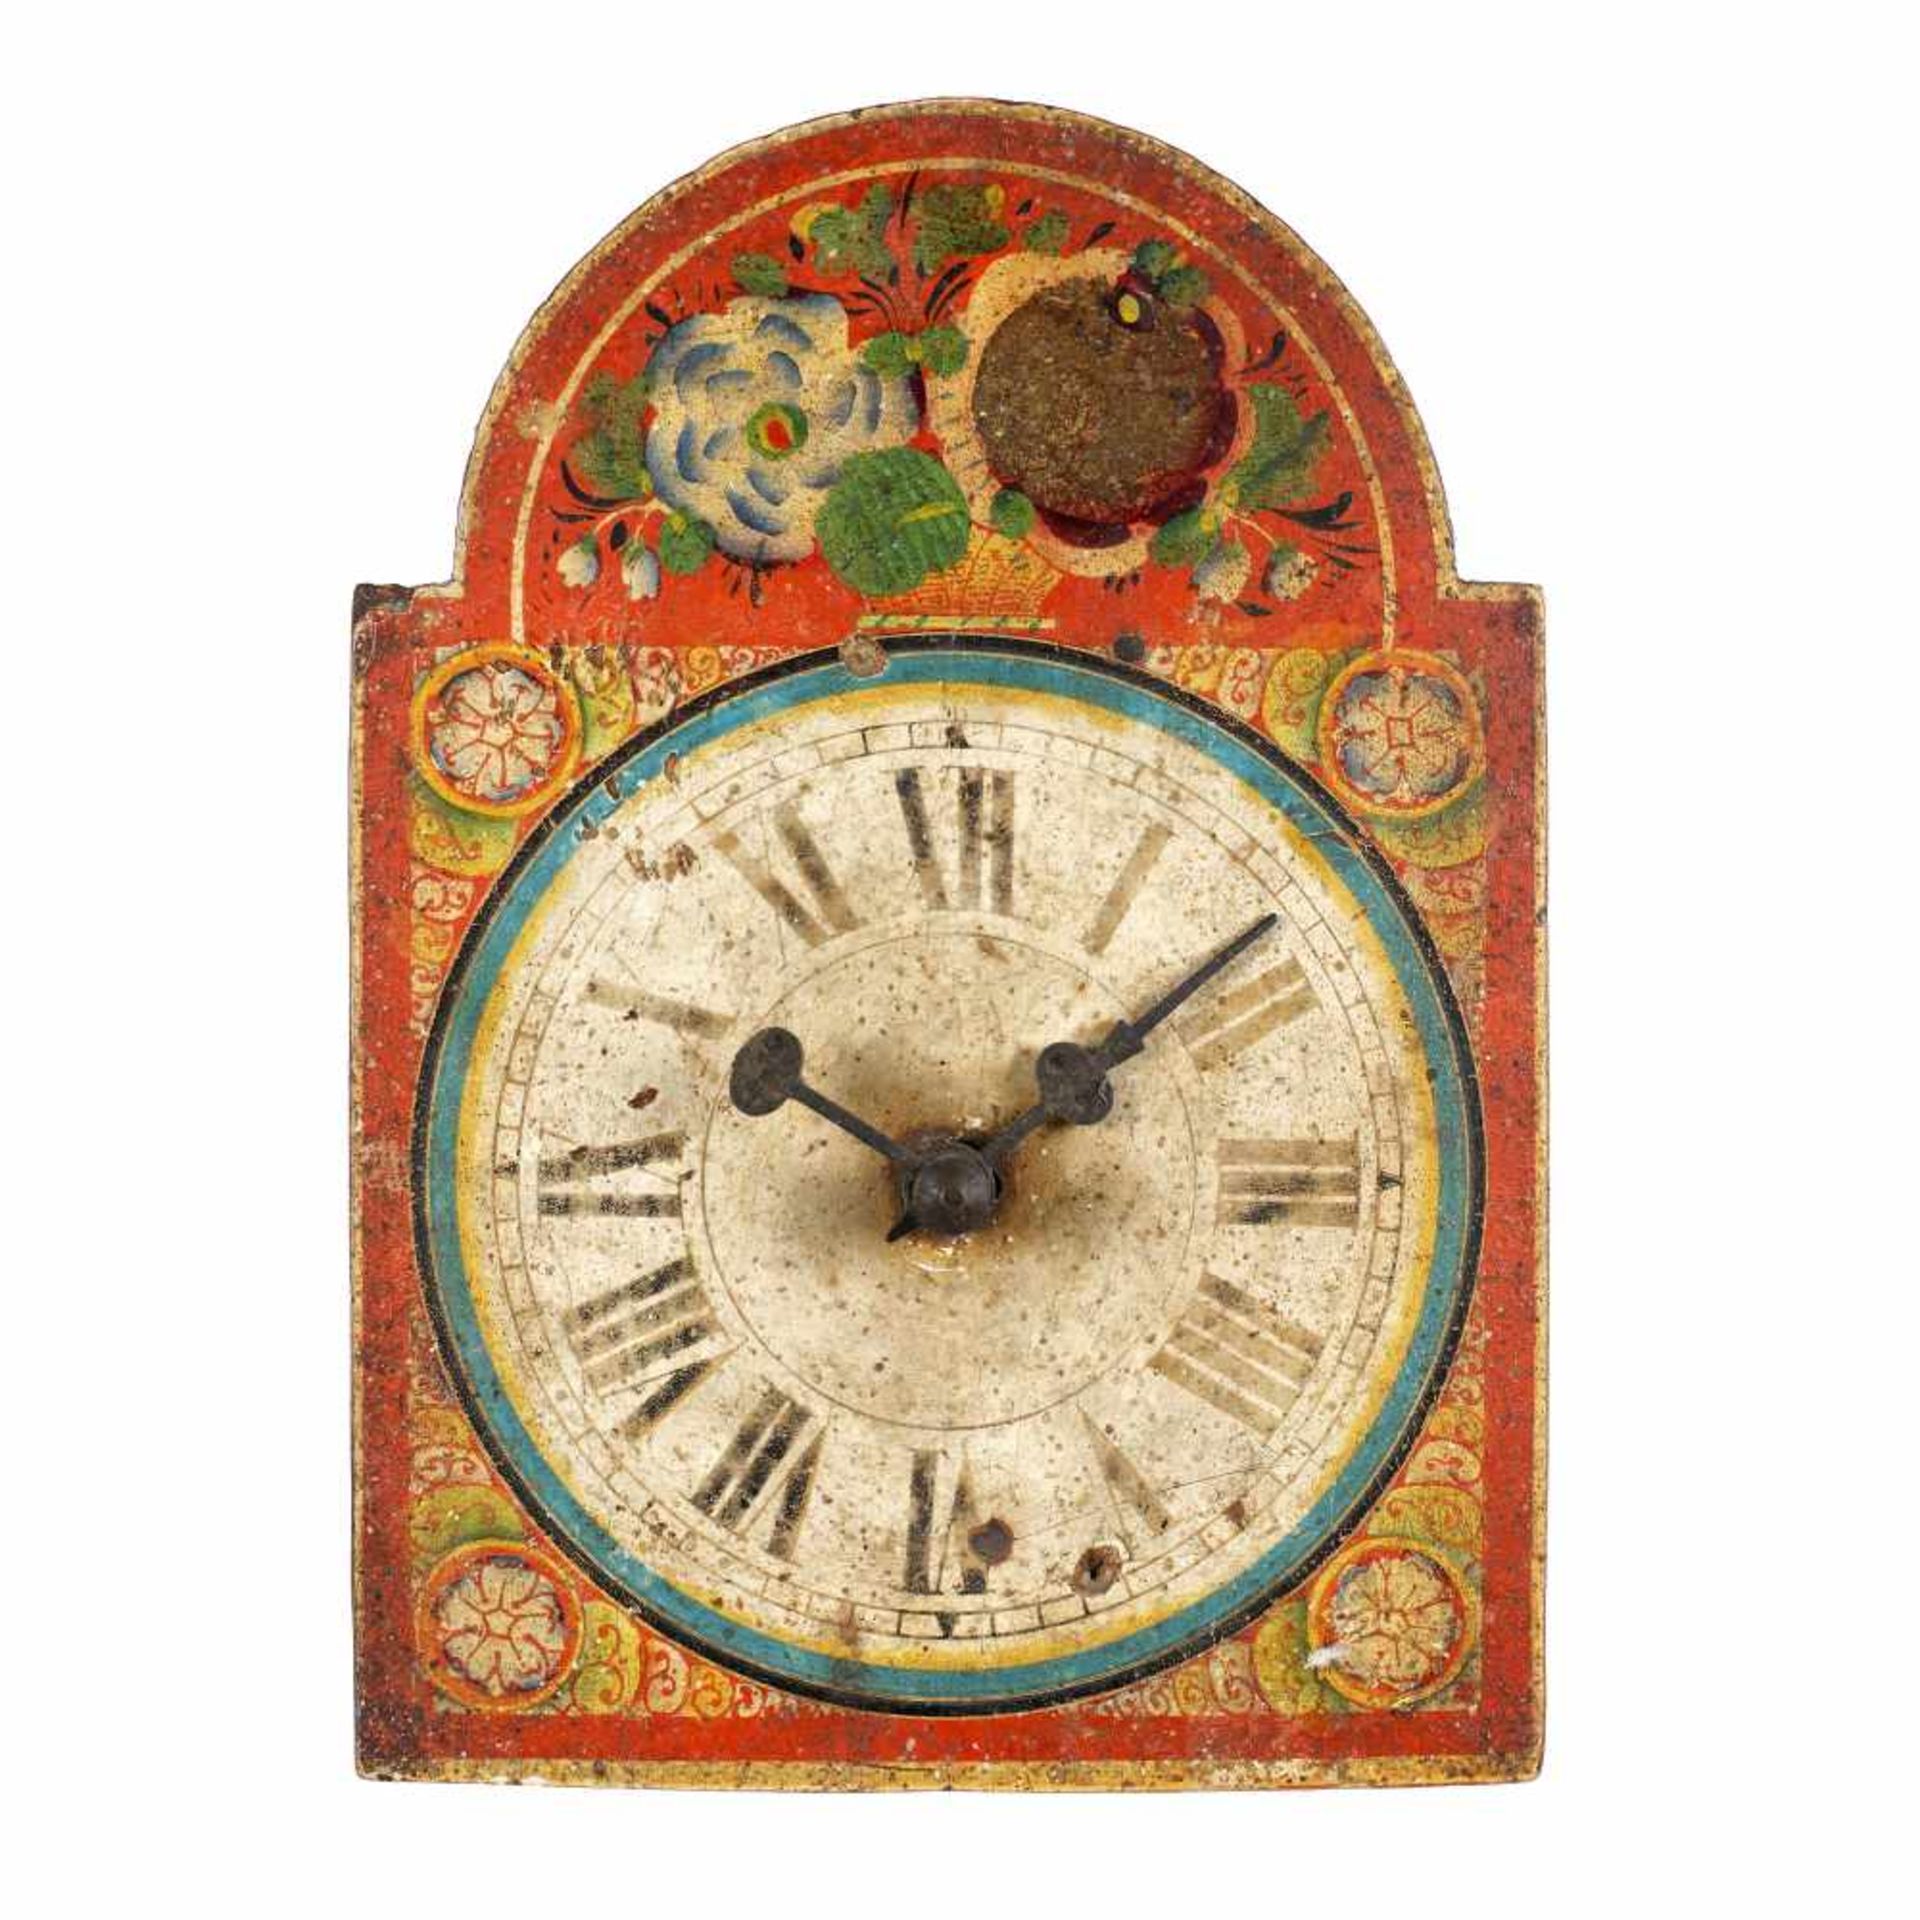 Painted wooden clock, Transylvania, early 20th century